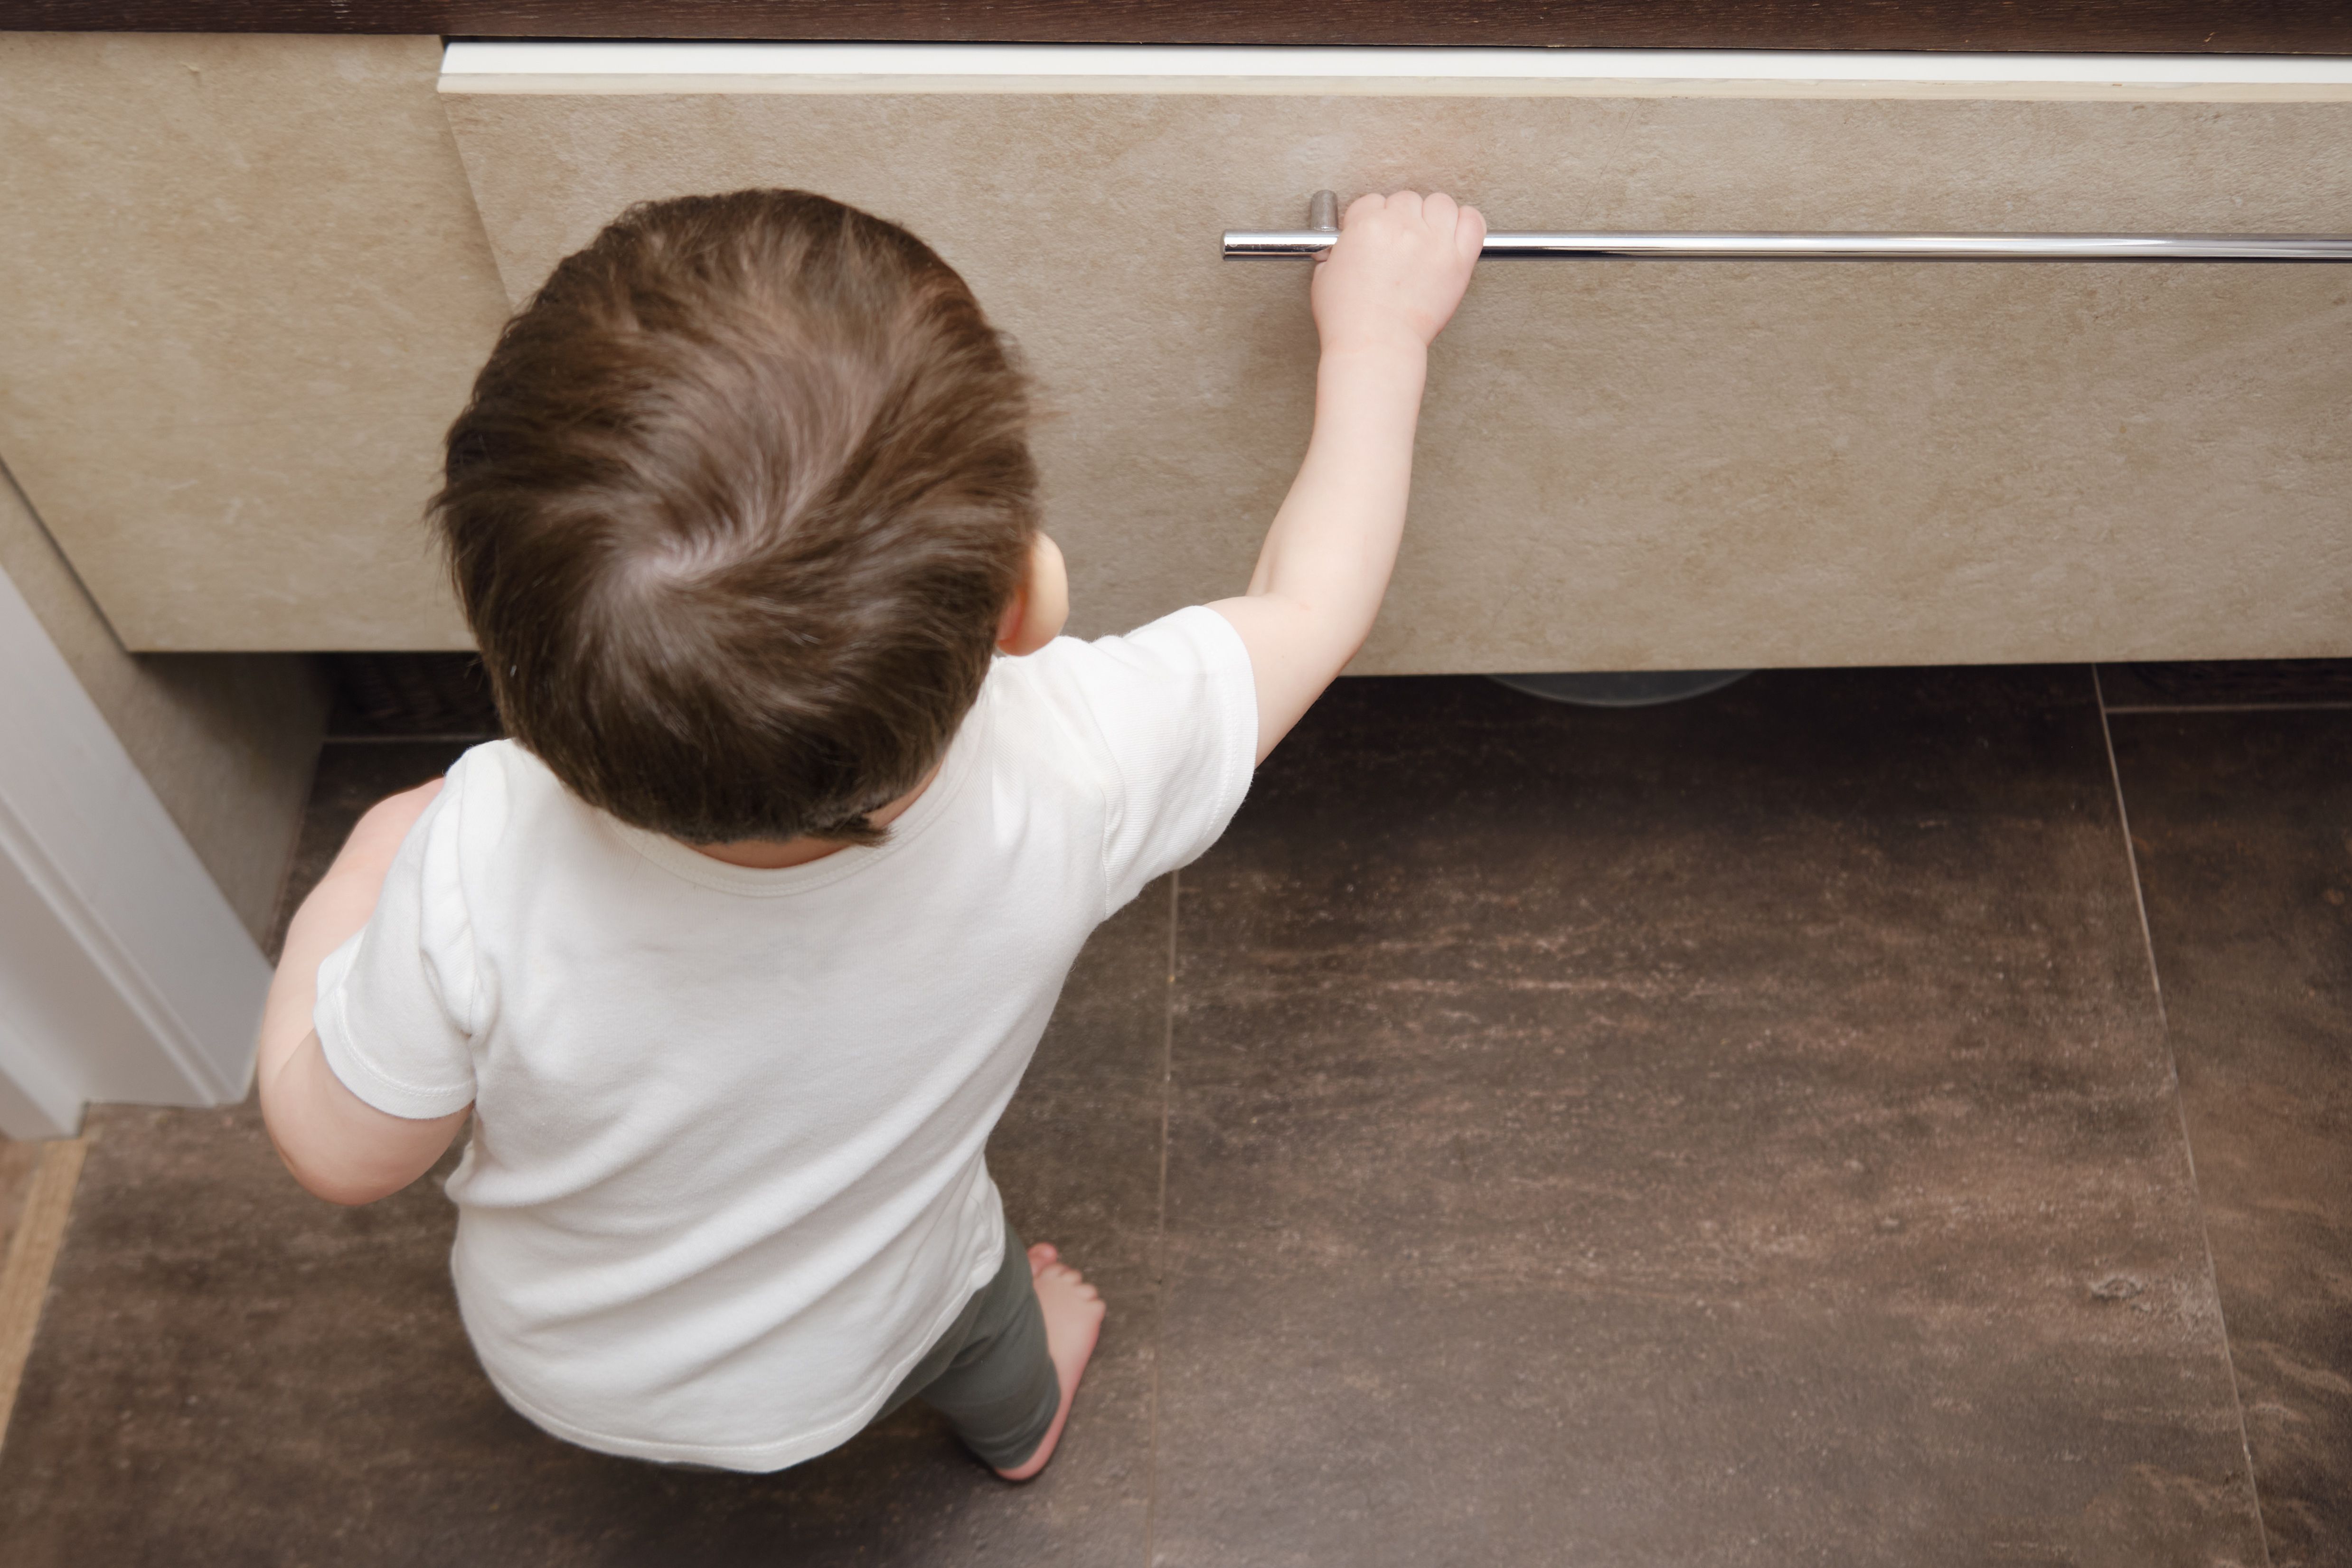 Is Your House Safe for Your Baby? 7 Expert Tips to Baby-Proof